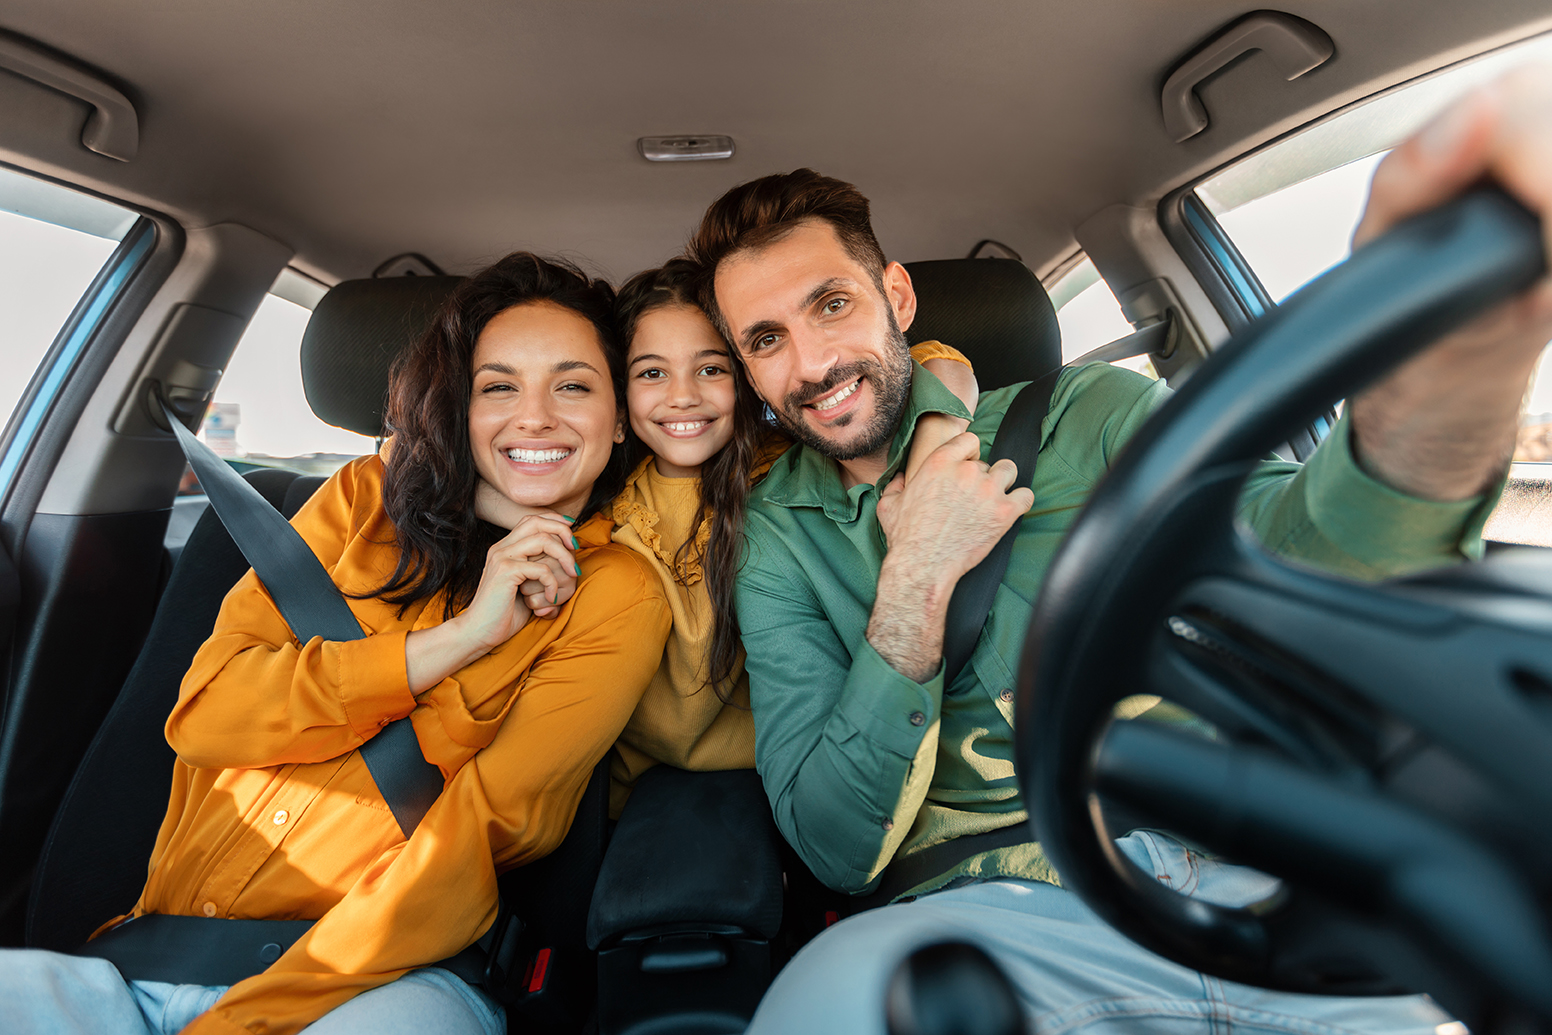 Automobile rent and purchase. Excited family embracing sitting in new car driving and enjoying road trip on vacation